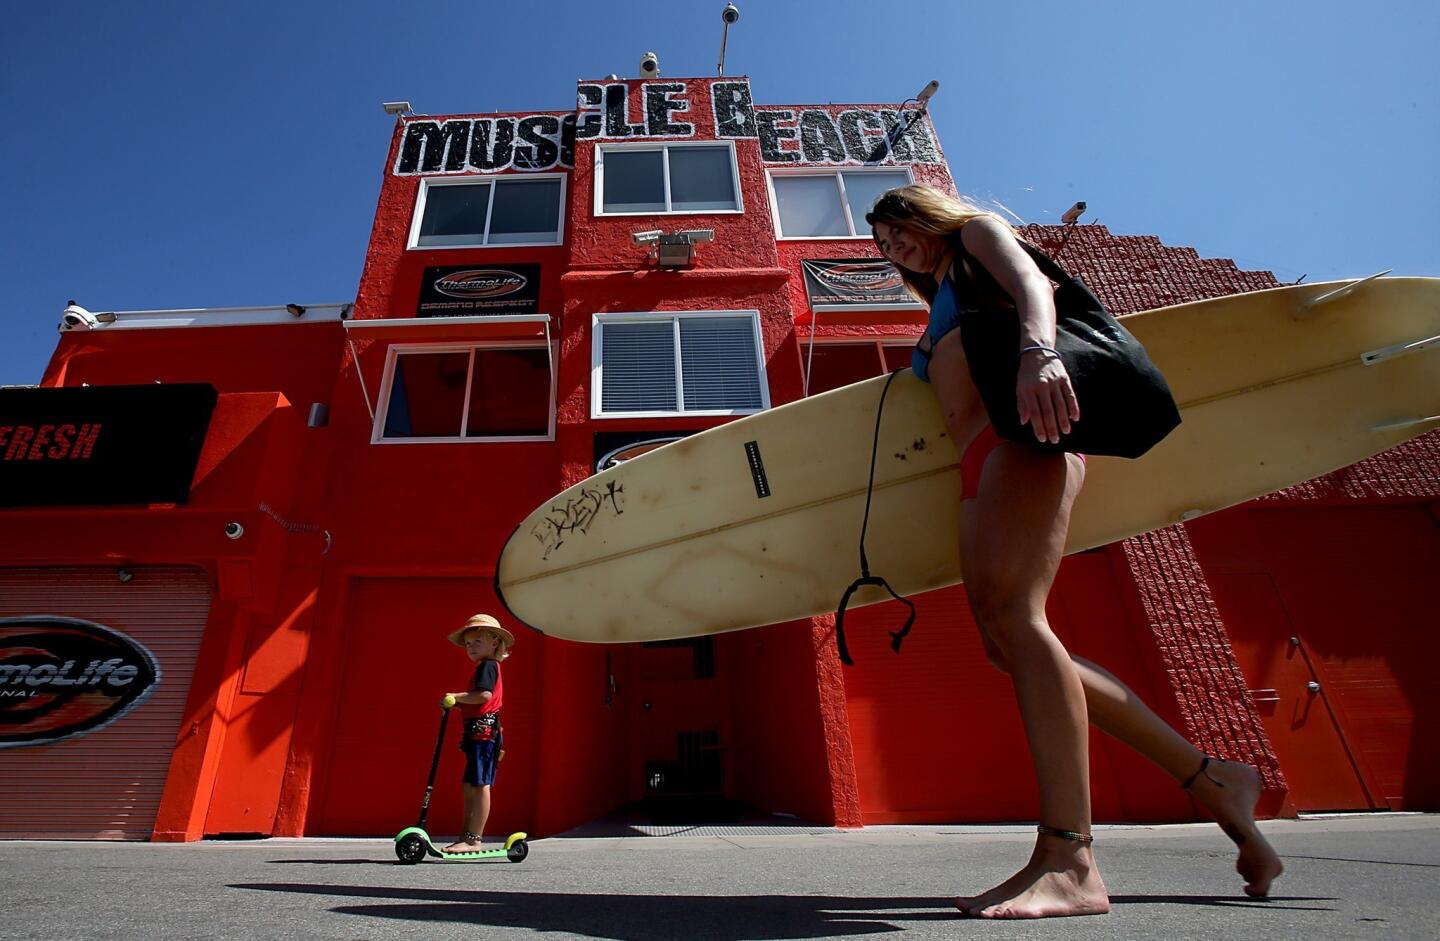 This Venice Beach building has no fewer than a dozen video surveillance cameras. More cameras along the boardwalk are planned as part of L.A. City Councilman Mike Bonin's initiative for a safer and more secure community.